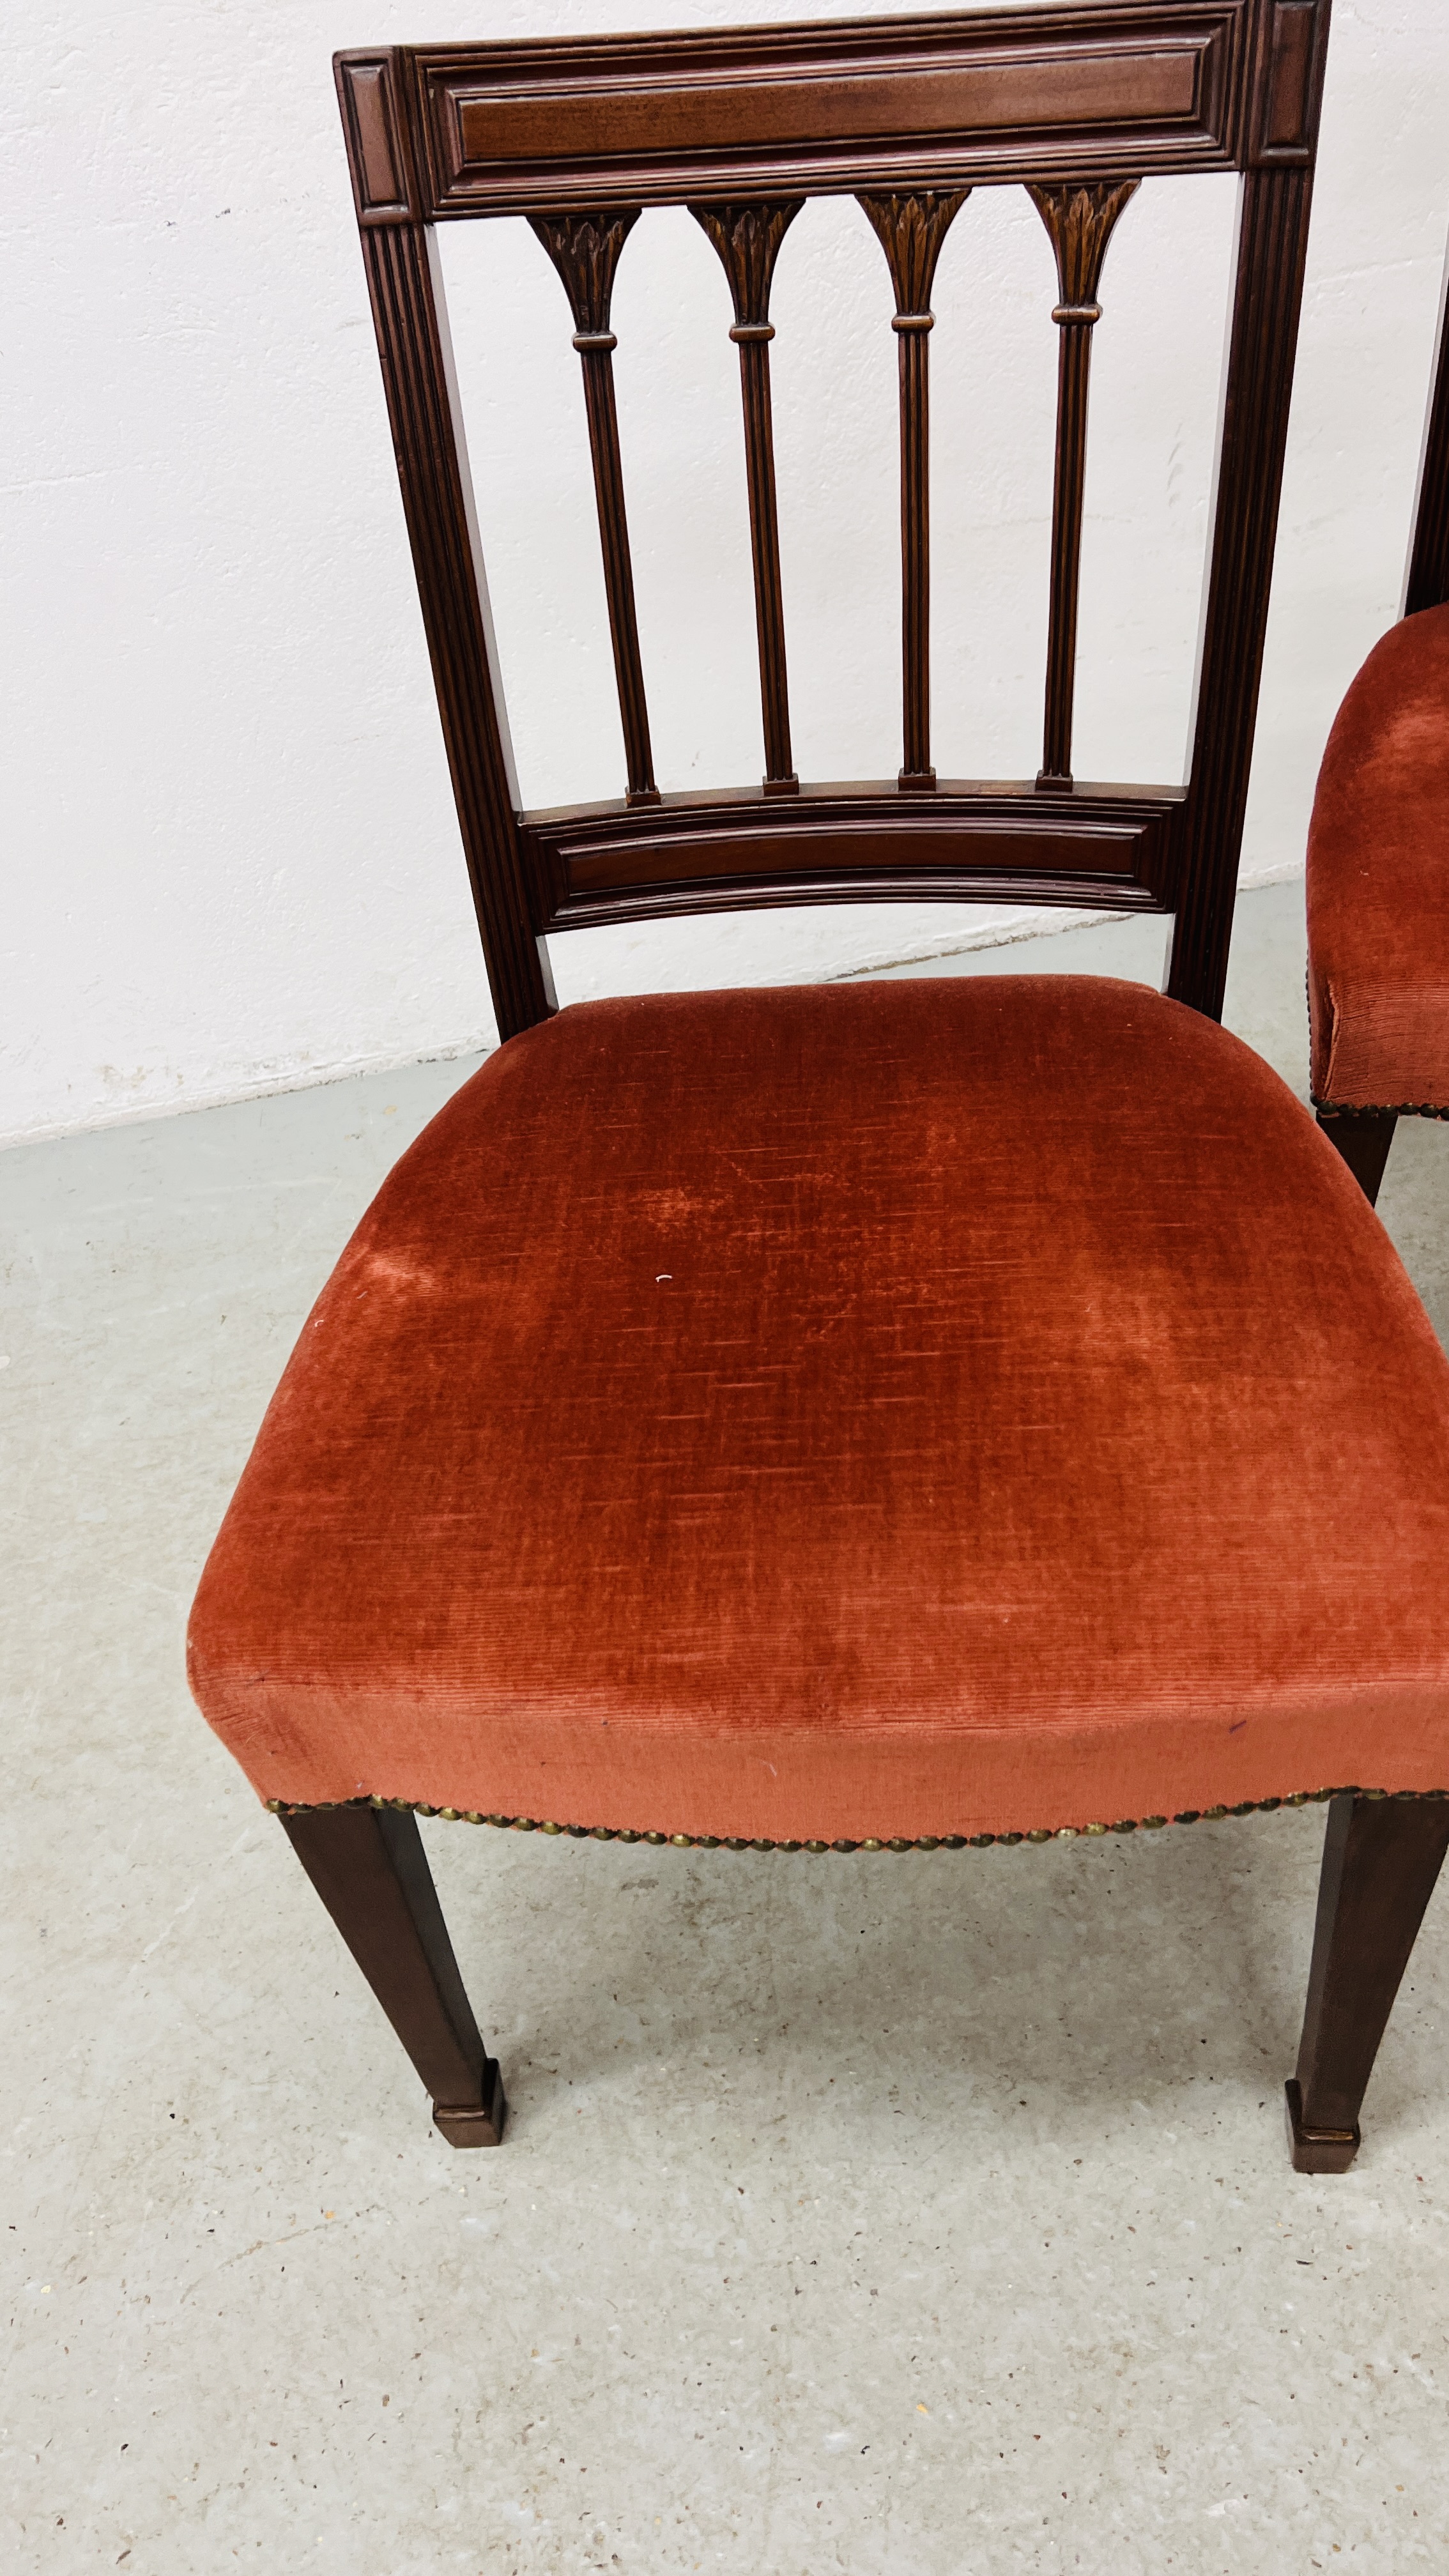 FOUR LATE GEORGIAN DINING CHAIRS IN HEPPLWHITE STYLE WITH PINK VELOUR STUFF OVER SEATS - Image 9 of 12